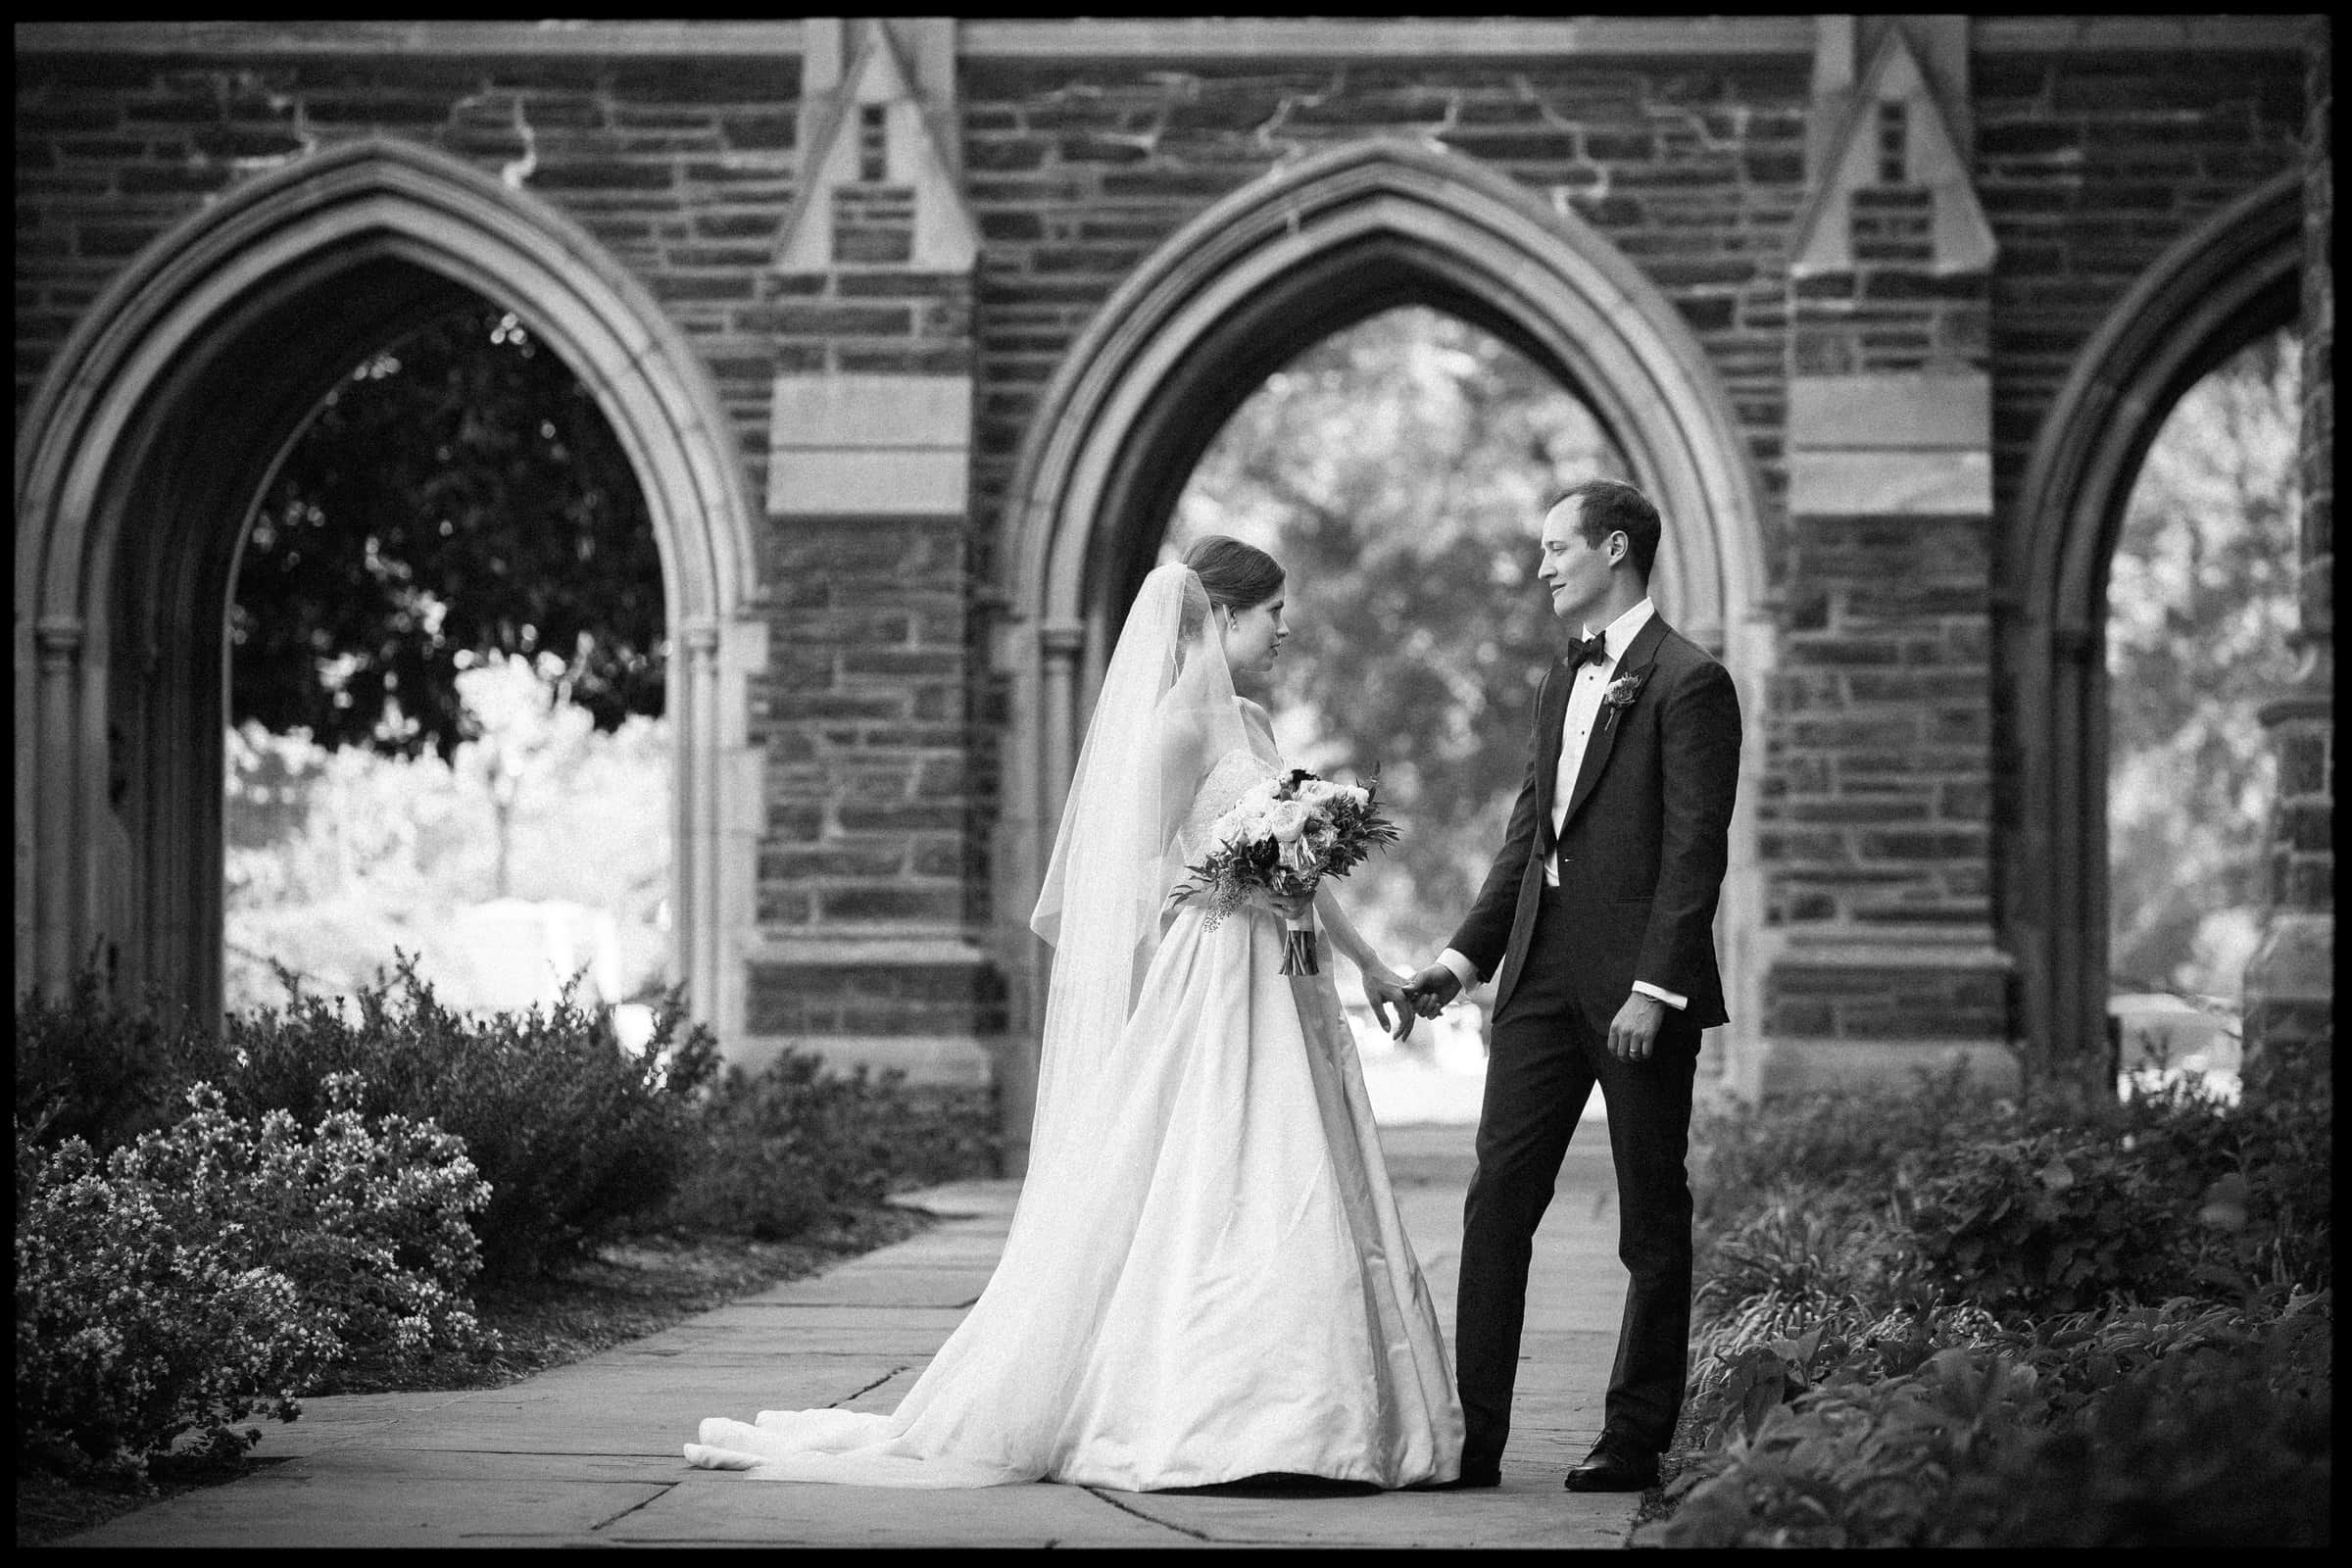 Duke Chapel wedding photo - bride and groom after ceremony